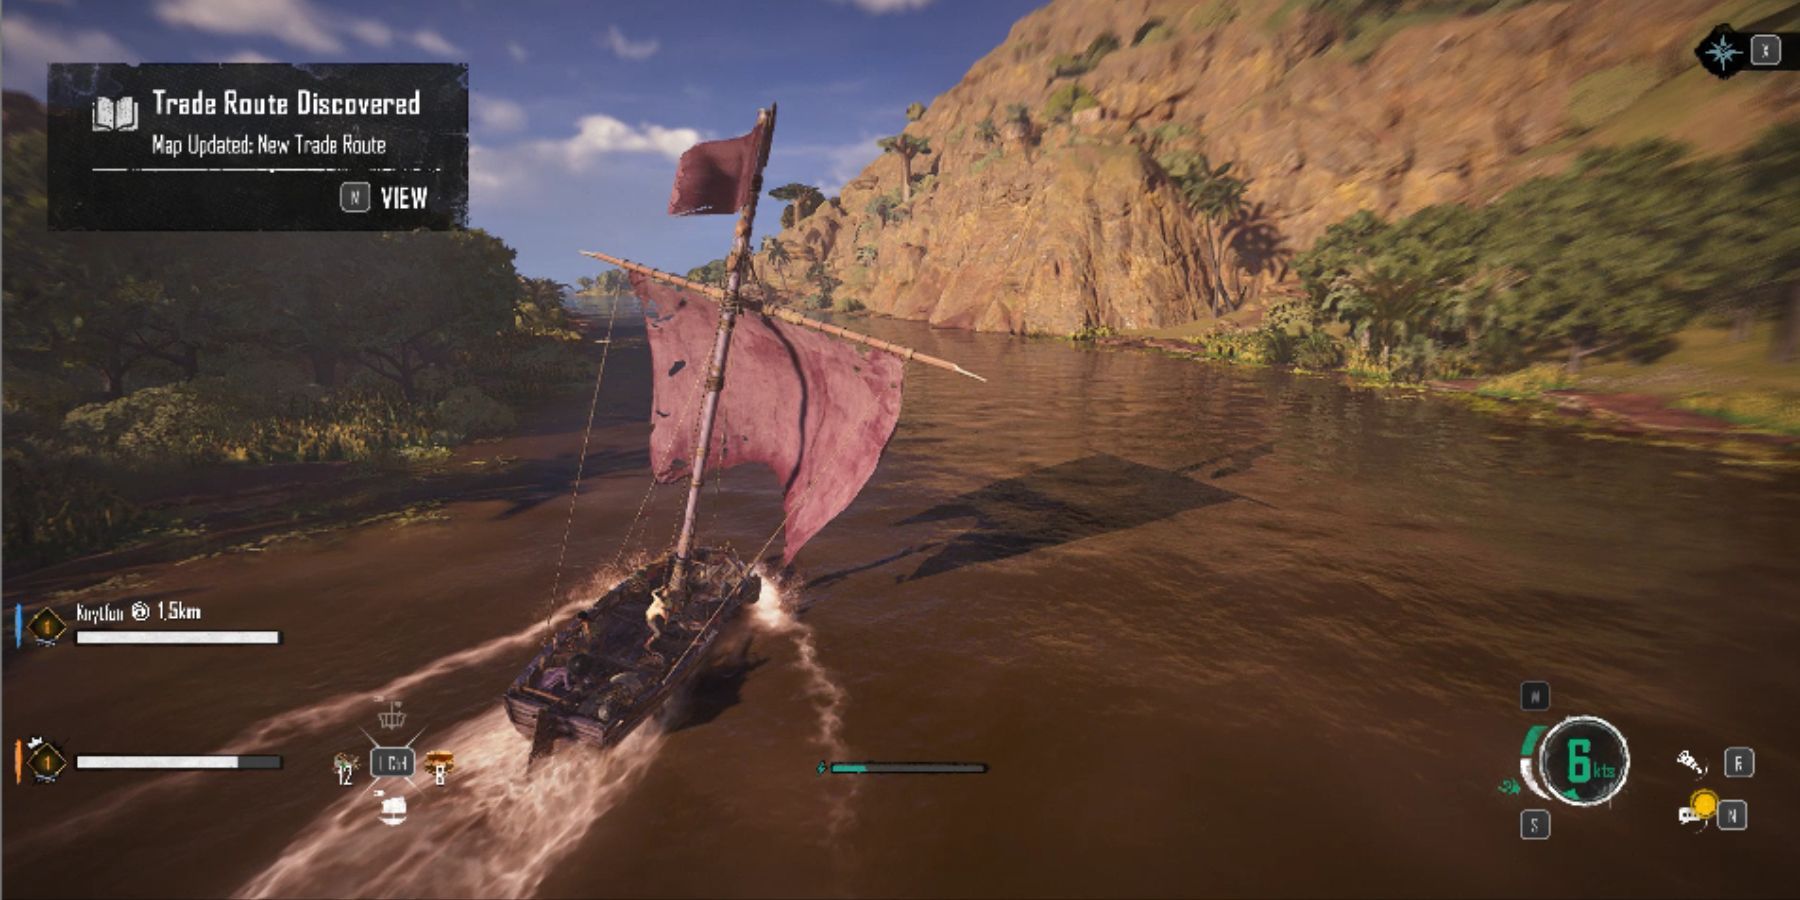 Skull and Bones Trade Route Discovered